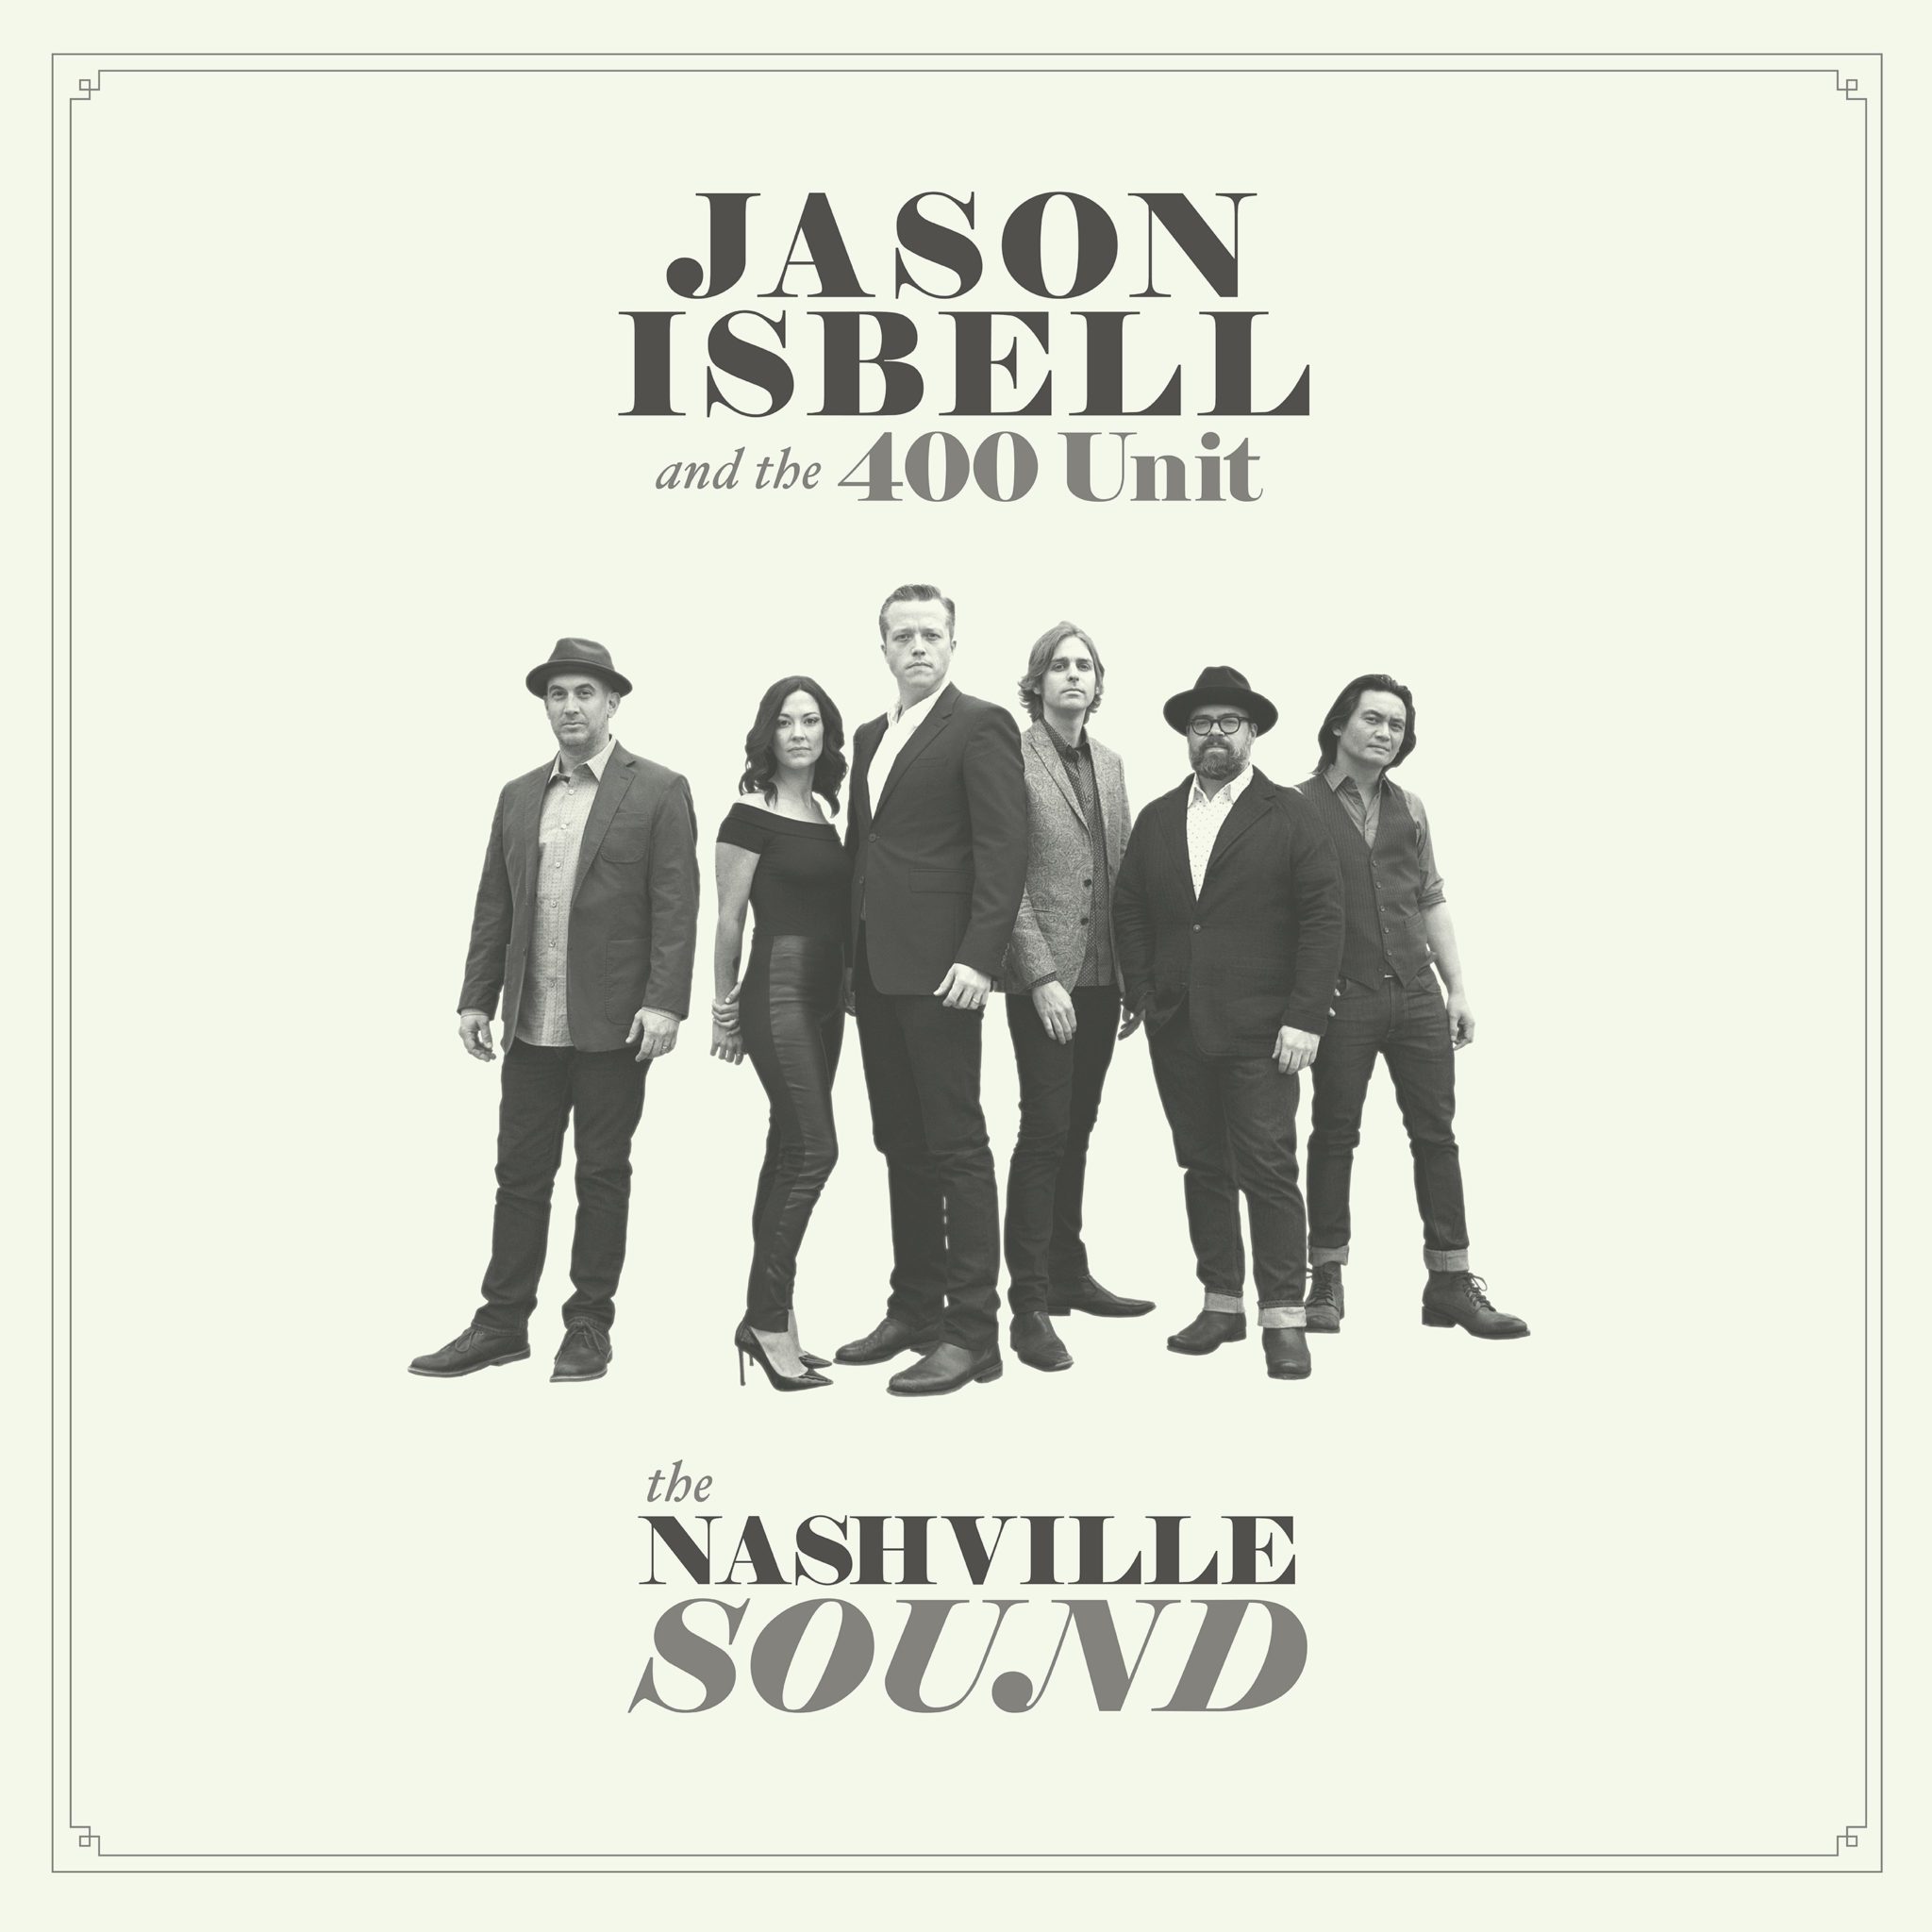 GIG REVIEW – JASON ISBELL AND THE 400 UNIT